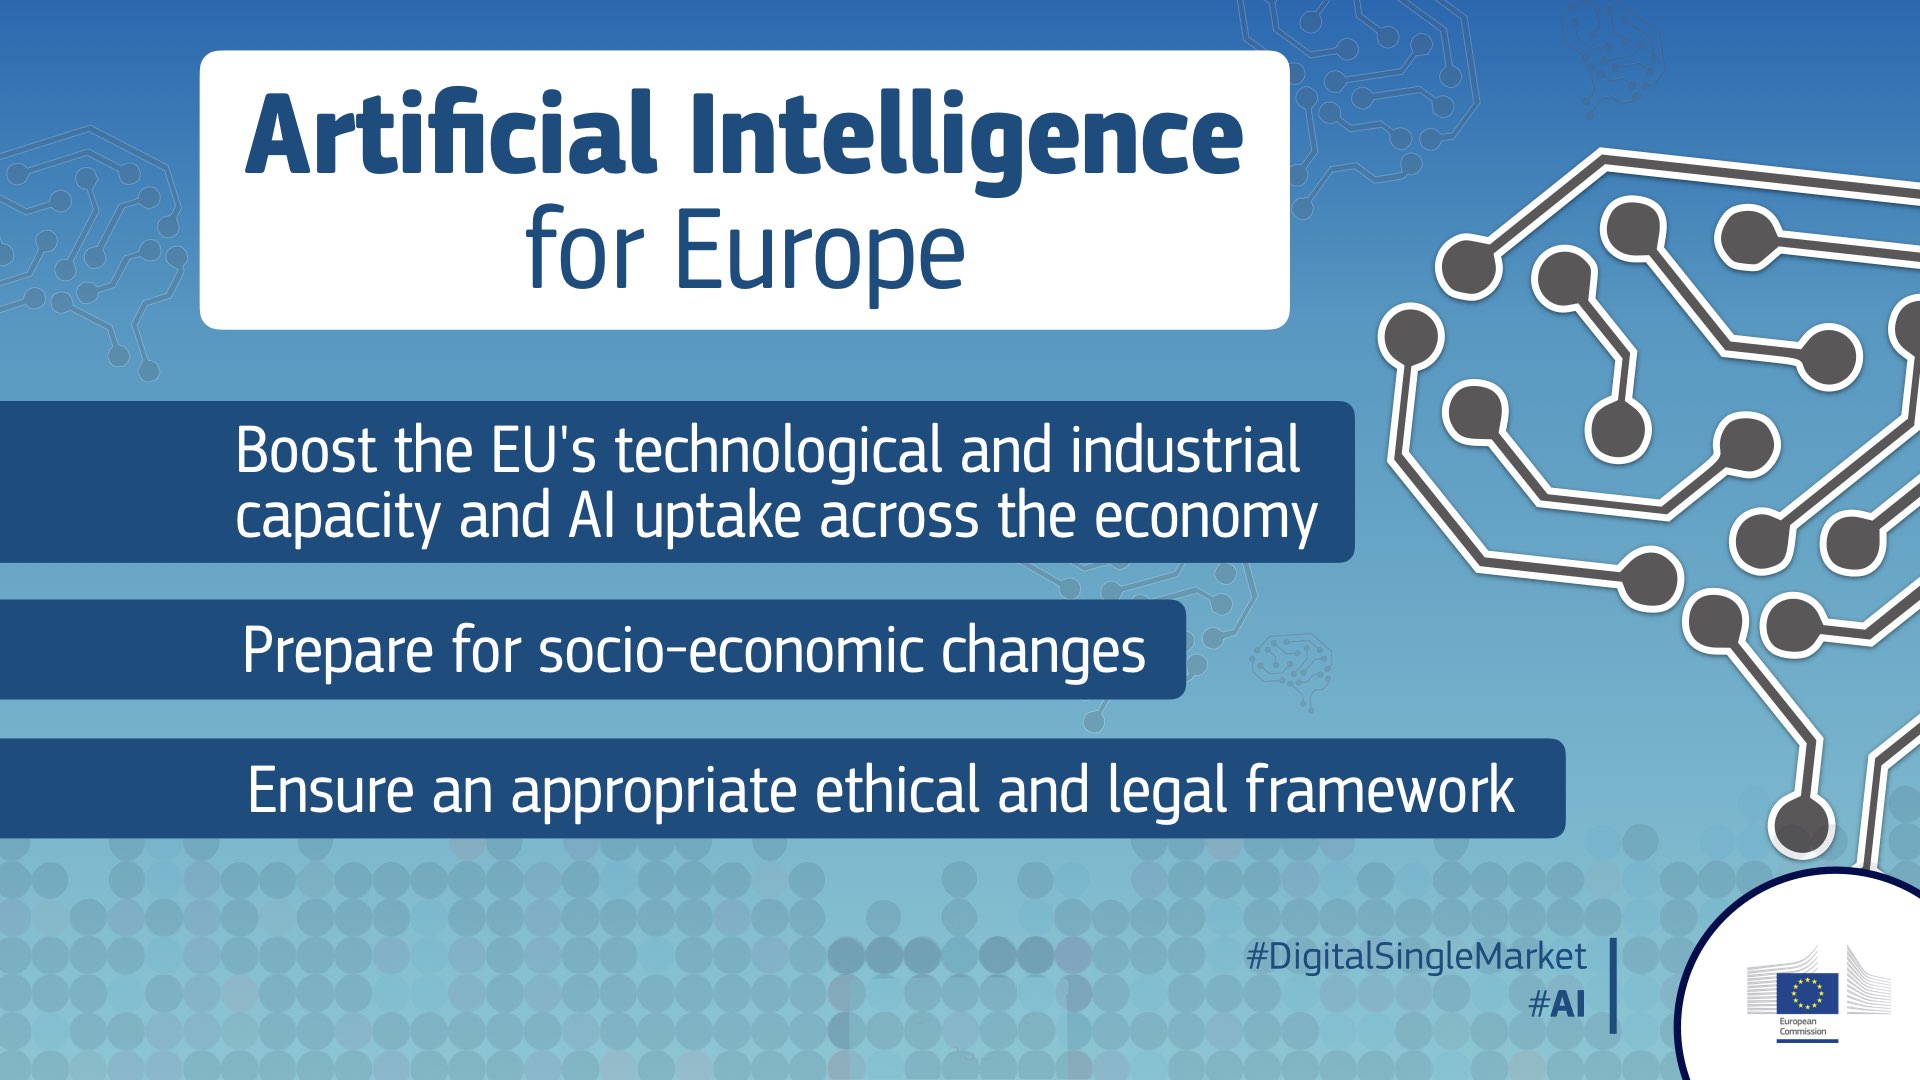 European Commission, Artificial Intelligence, Responsible Gaming